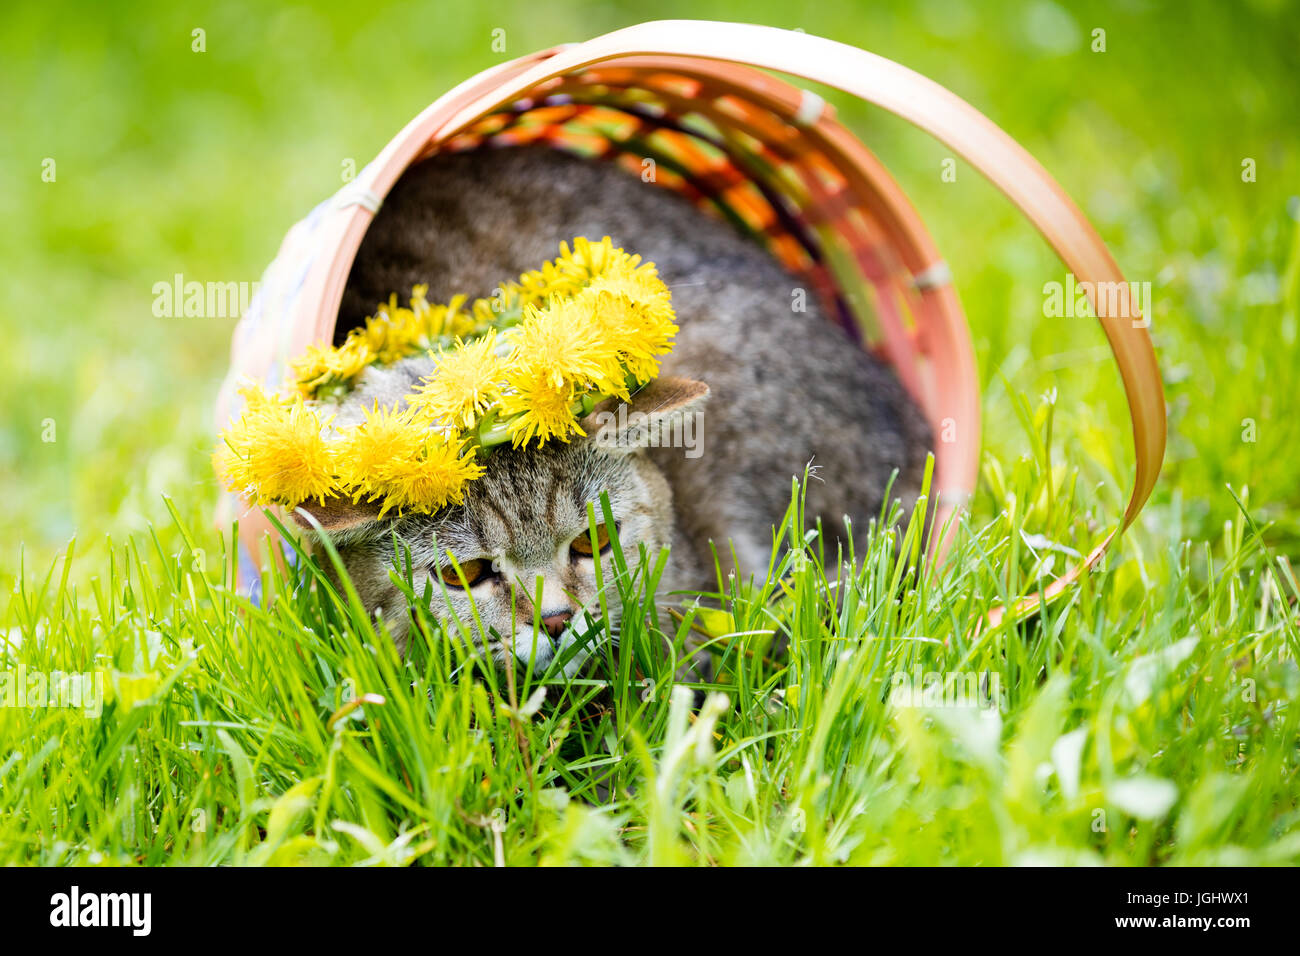 Portrait of a cat, sitting in a basket on the grass, crowned with dandelion chaplet Stock Photo